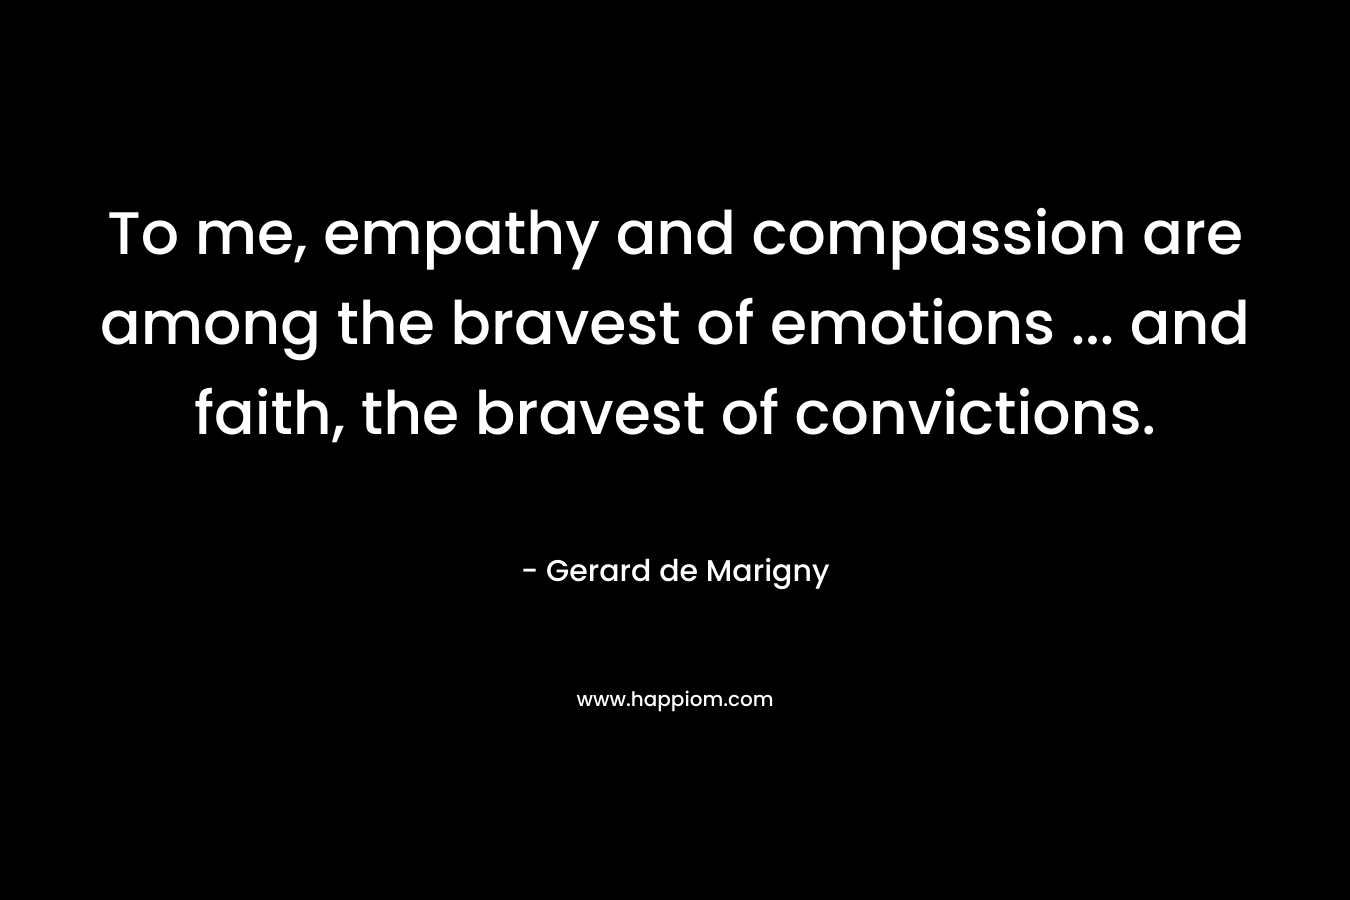 To me, empathy and compassion are among the bravest of emotions … and faith, the bravest of convictions. – Gerard de Marigny